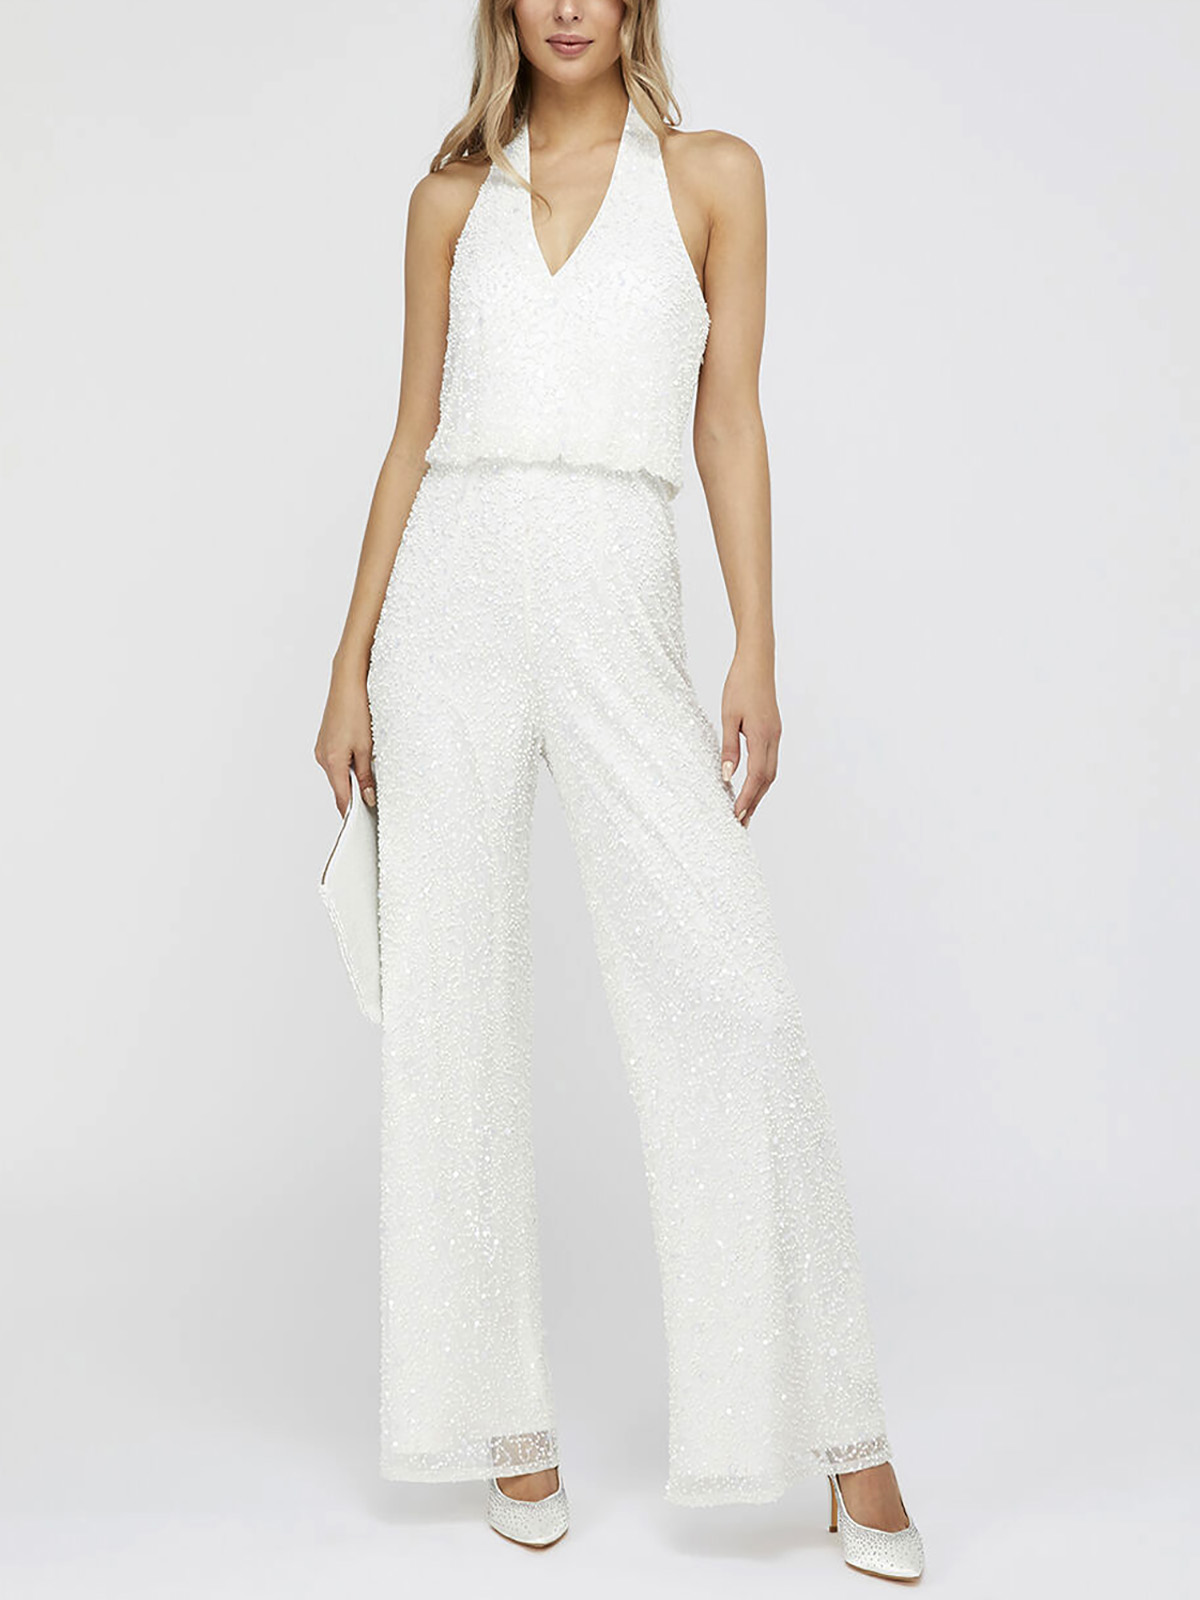 M0NSOON IVORY Diana Sequin Bridal Halter Jumpsuit - Size 6 to 18